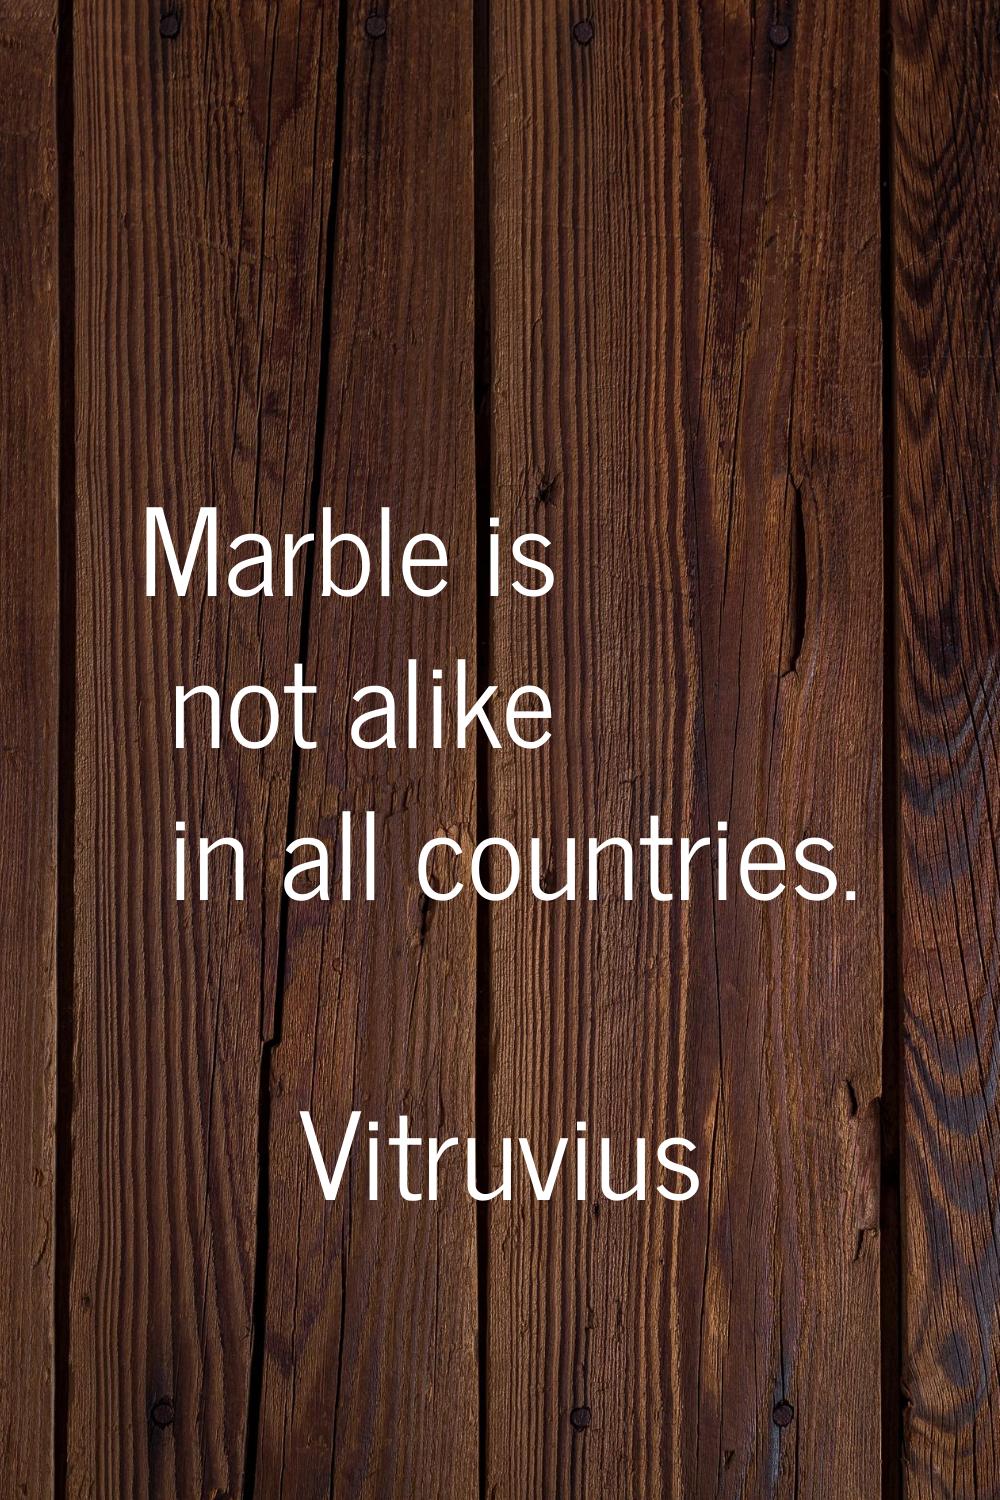 Marble is not alike in all countries.